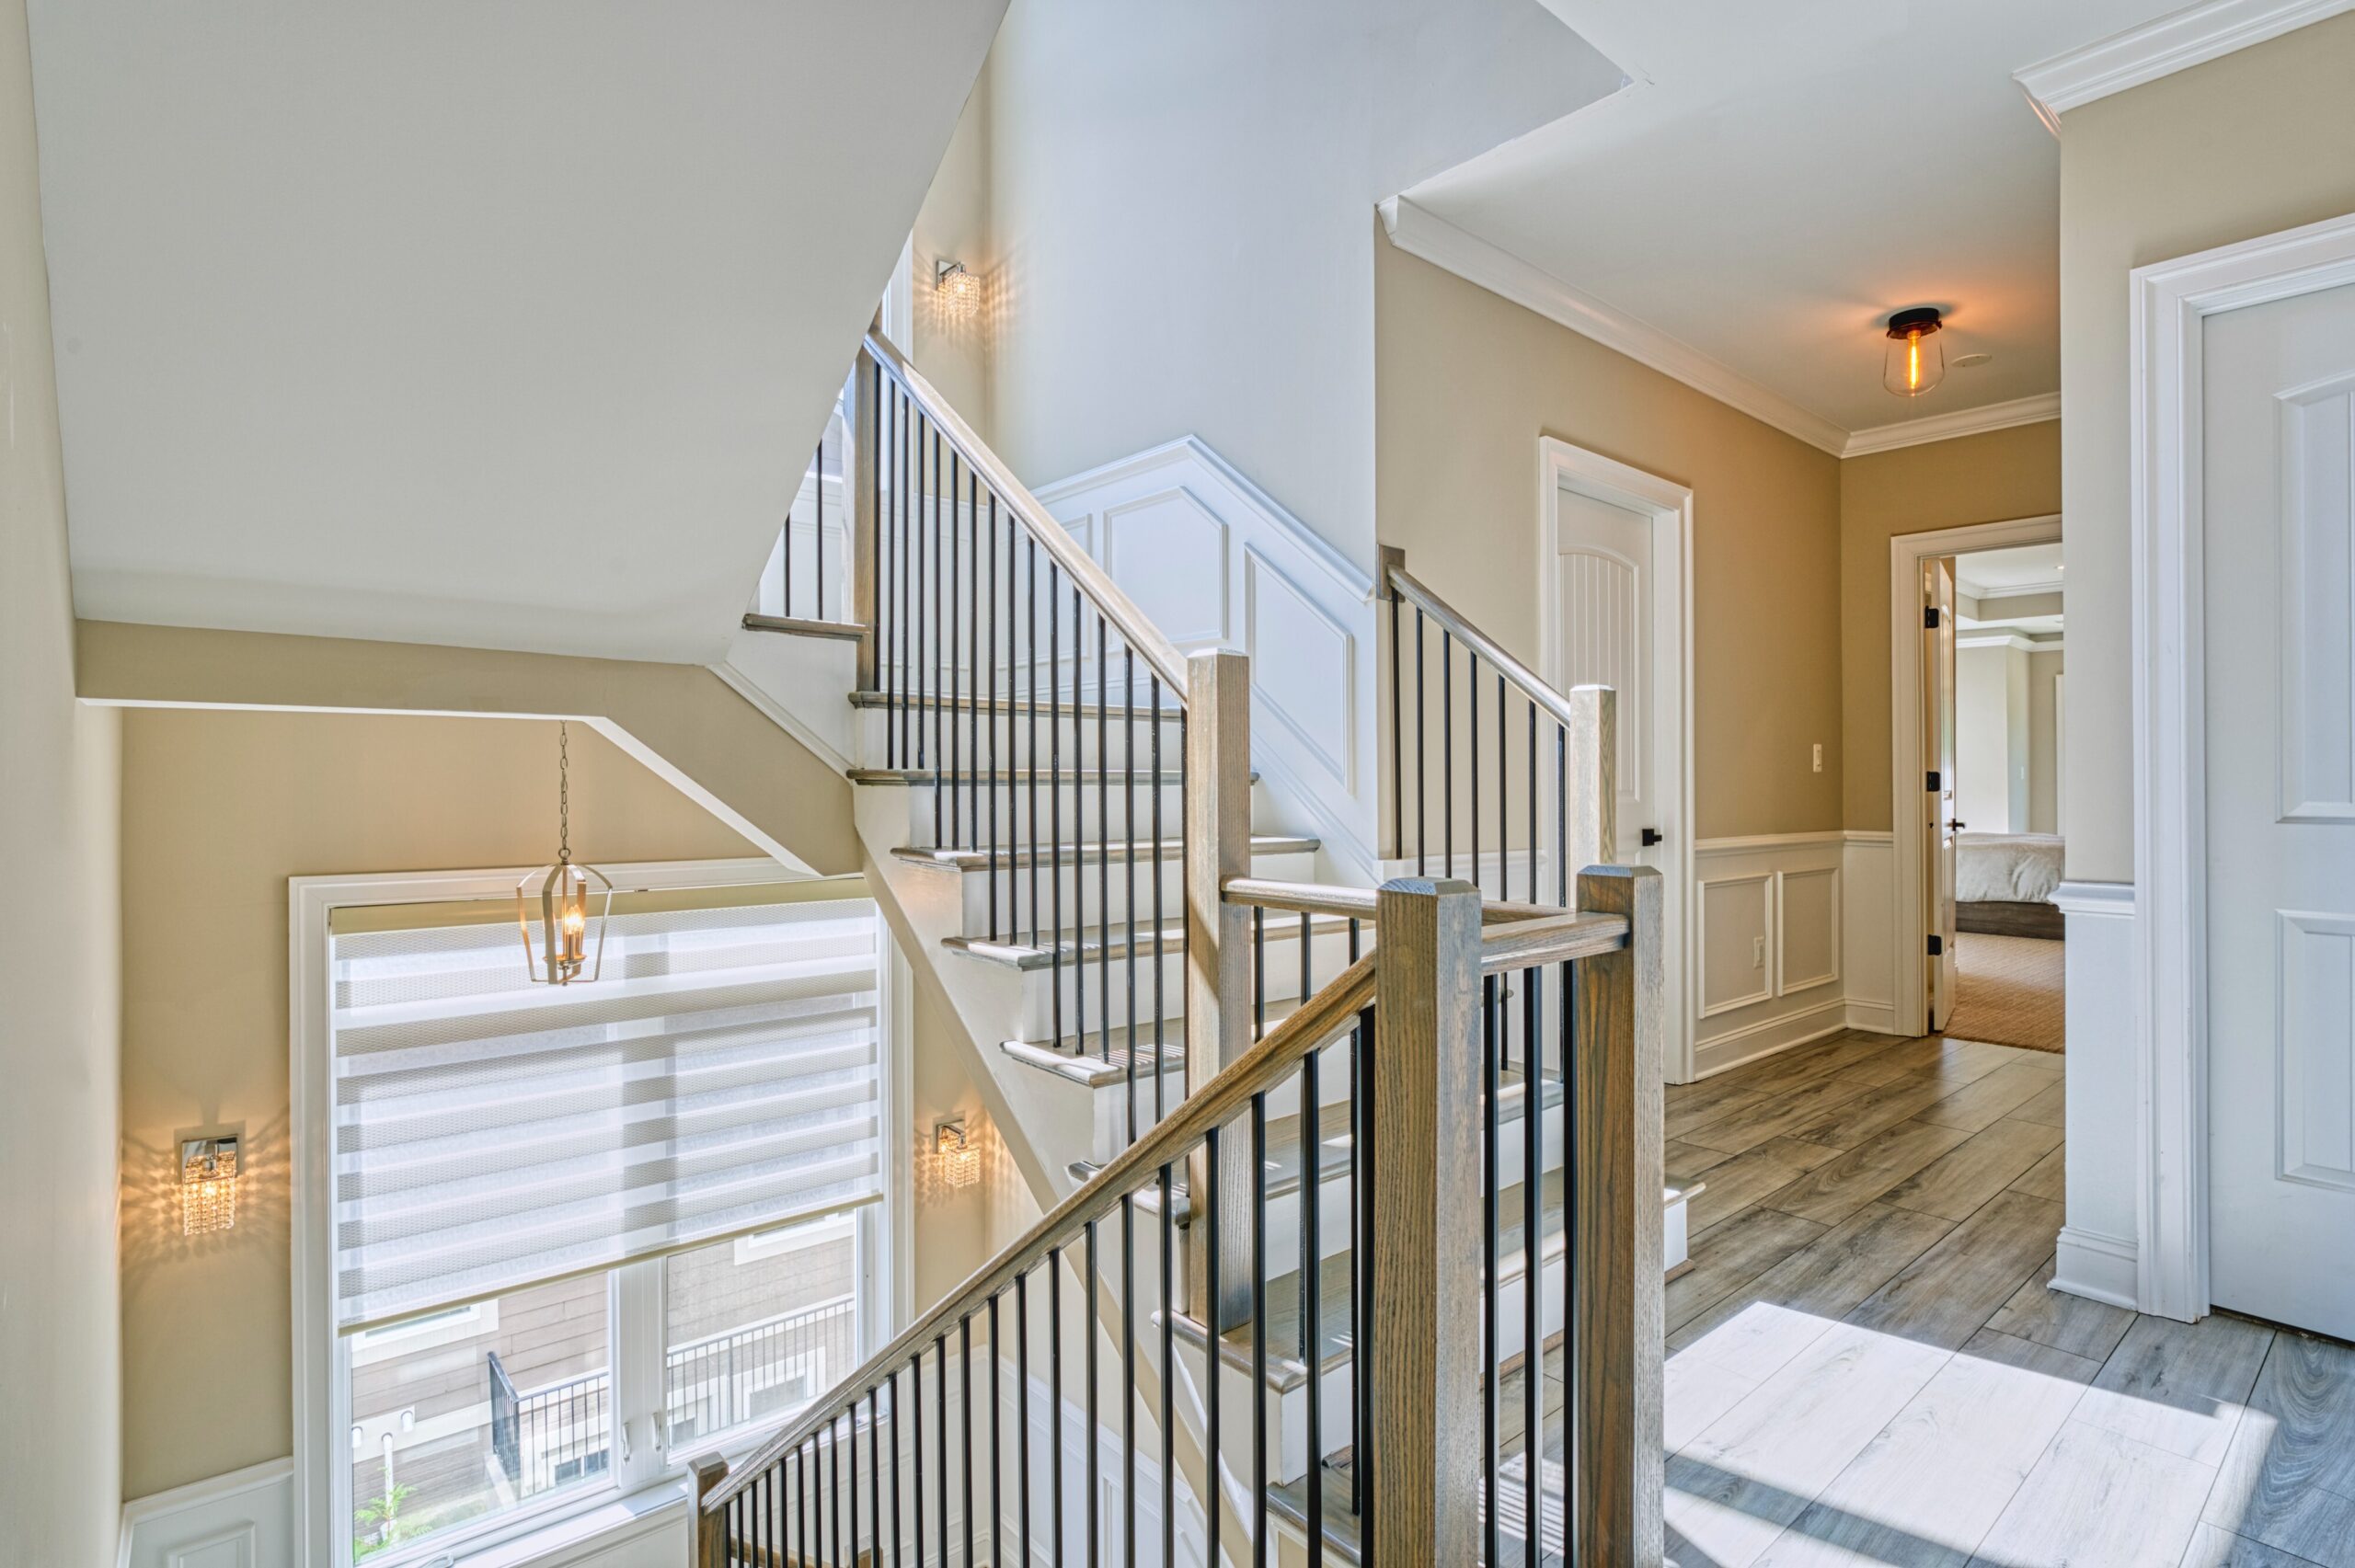 professional Fusion photo of the interior of a home in McLean, VA - showing stair case leading down as well as up.